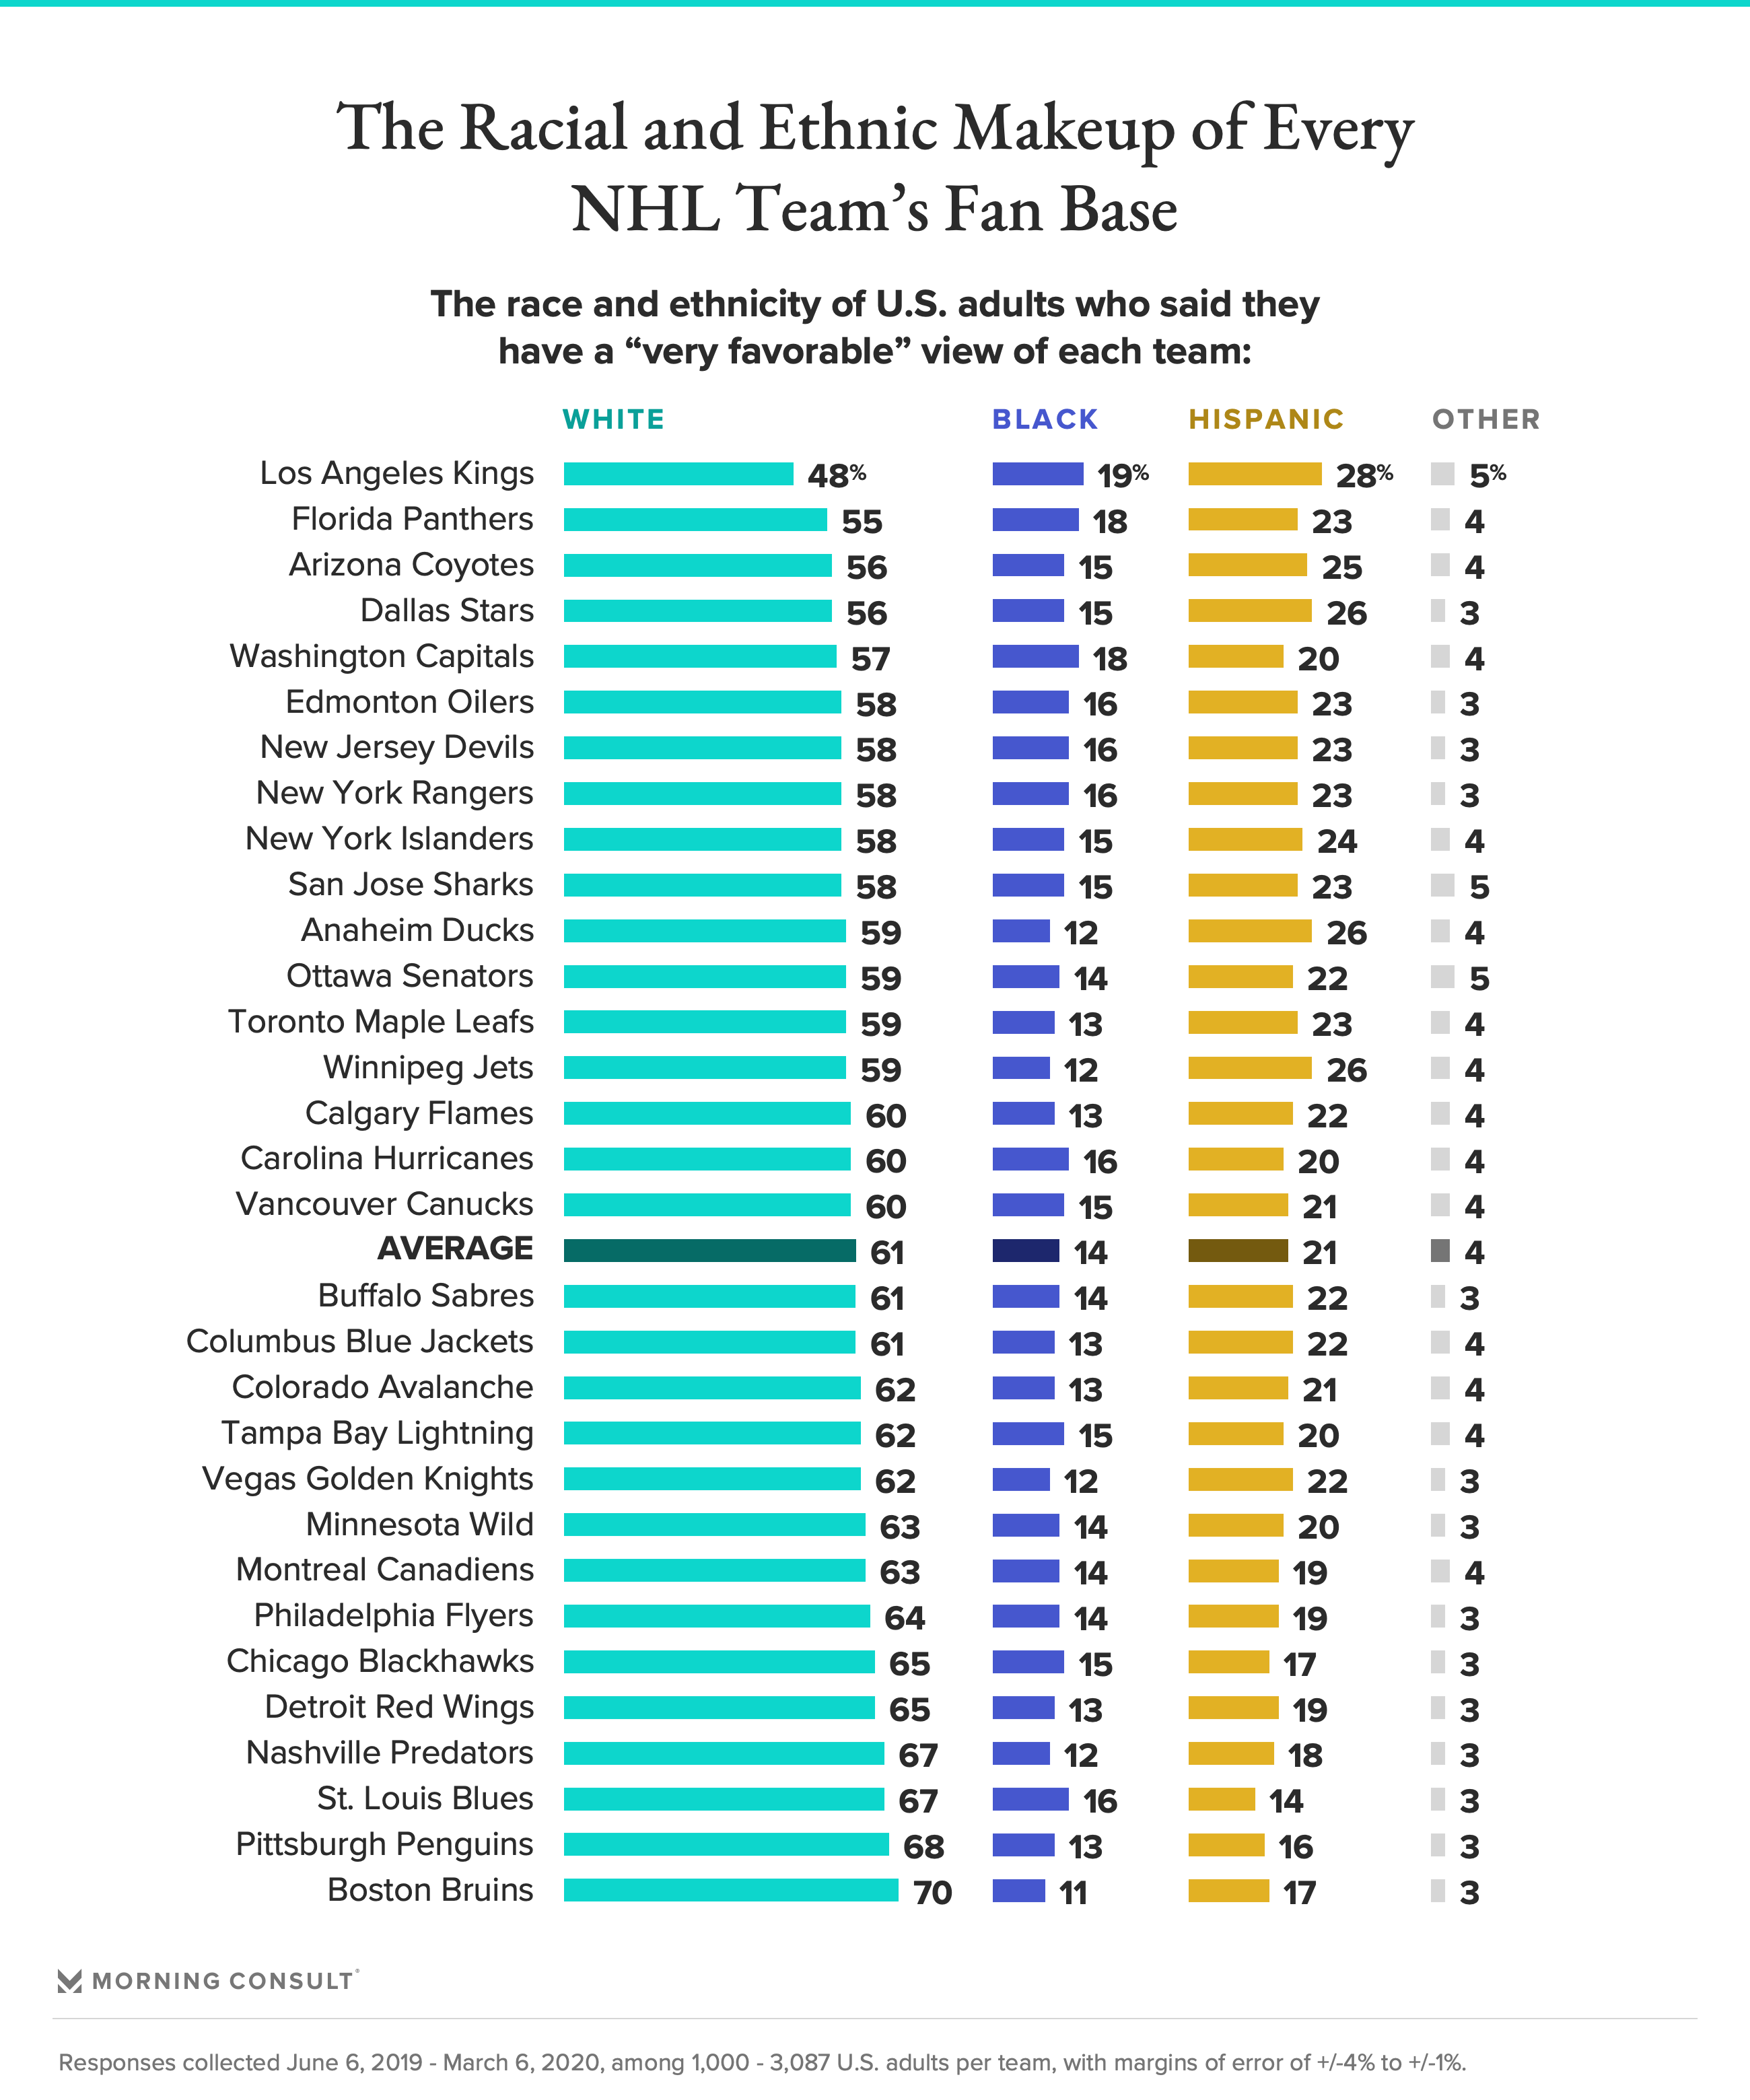 Chart with racial and ethnic makeup of NHL fans